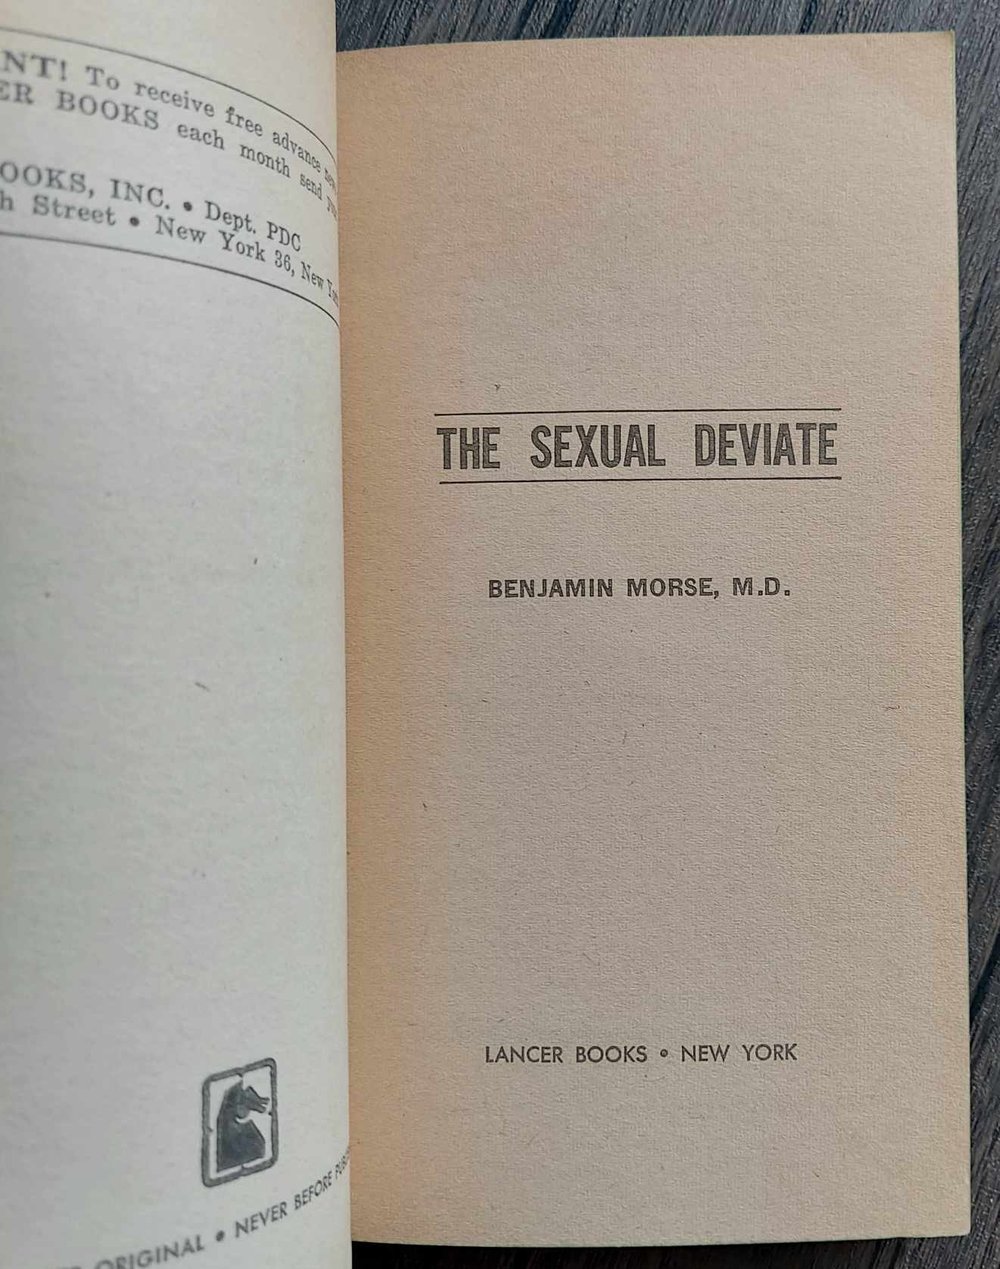 The Sexual Deviate with Case Histories, by Benjamin Morse, M.D.